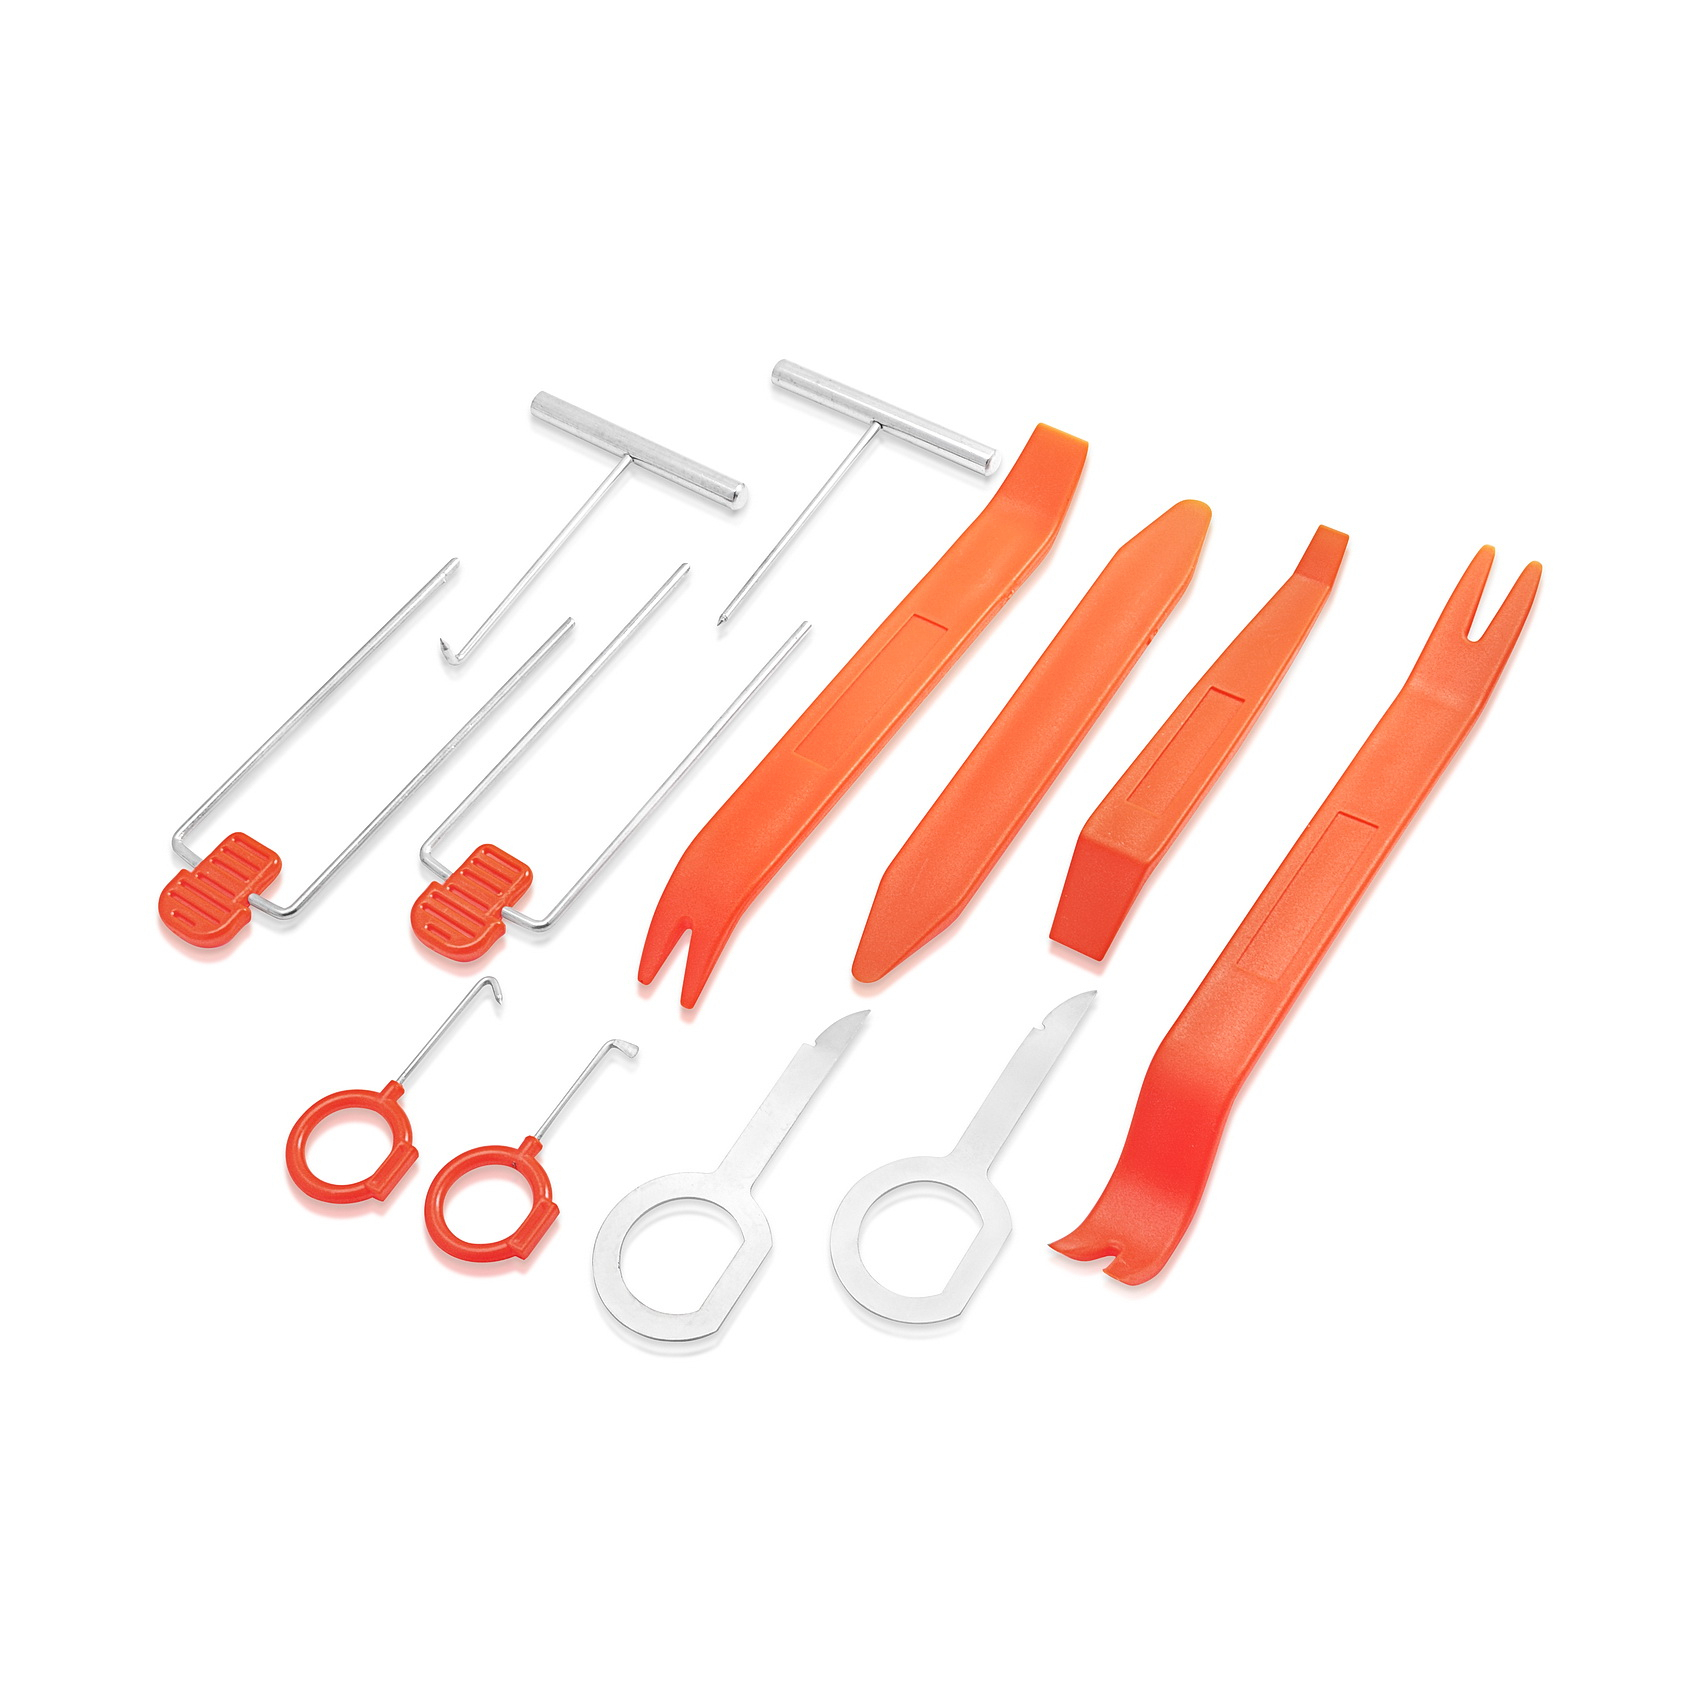 12 pcs Red Mutli Variety Tool Set Add-on for Vinyl Application Pouch